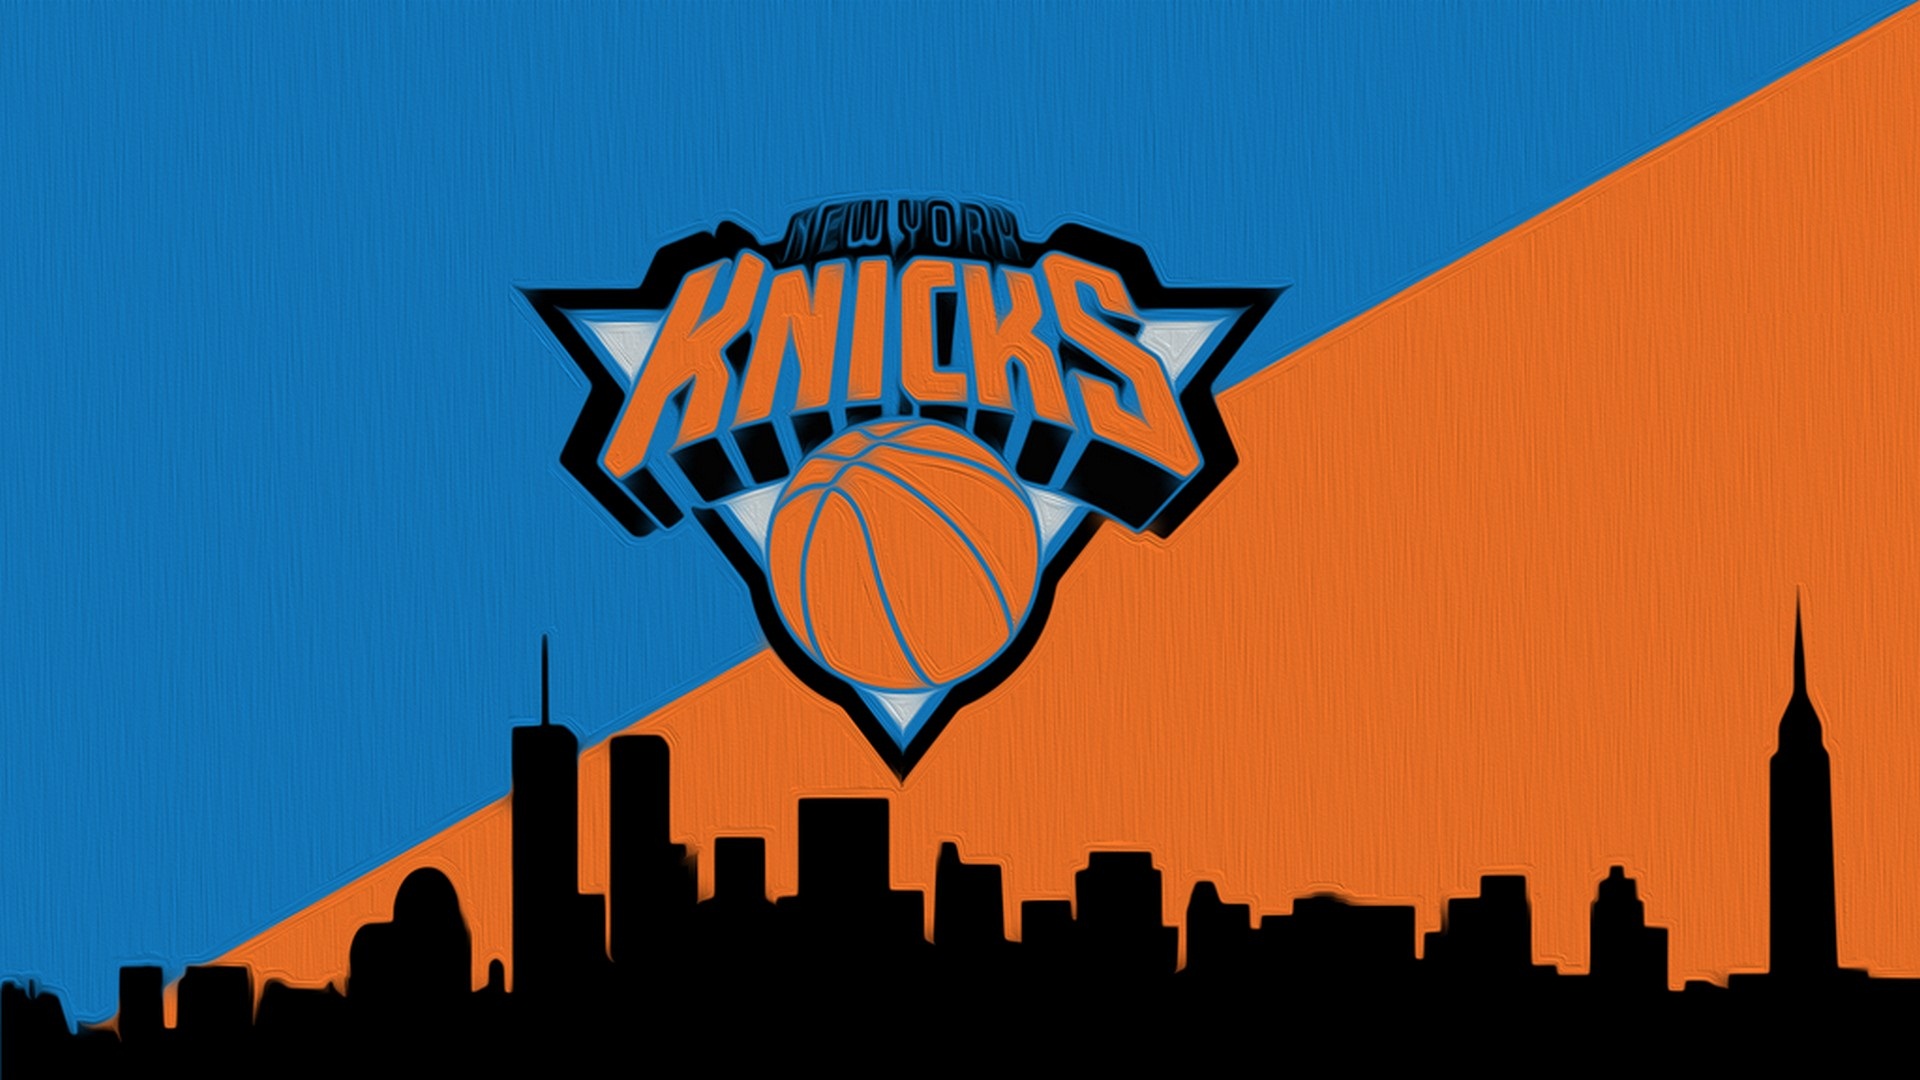 HD Desktop Wallpaper Knicks with image dimensions 1920x1080 pixel. You can make this wallpaper for your Desktop Computer Backgrounds, Windows or Mac Screensavers, iPhone Lock screen, Tablet or Android and another Mobile Phone device